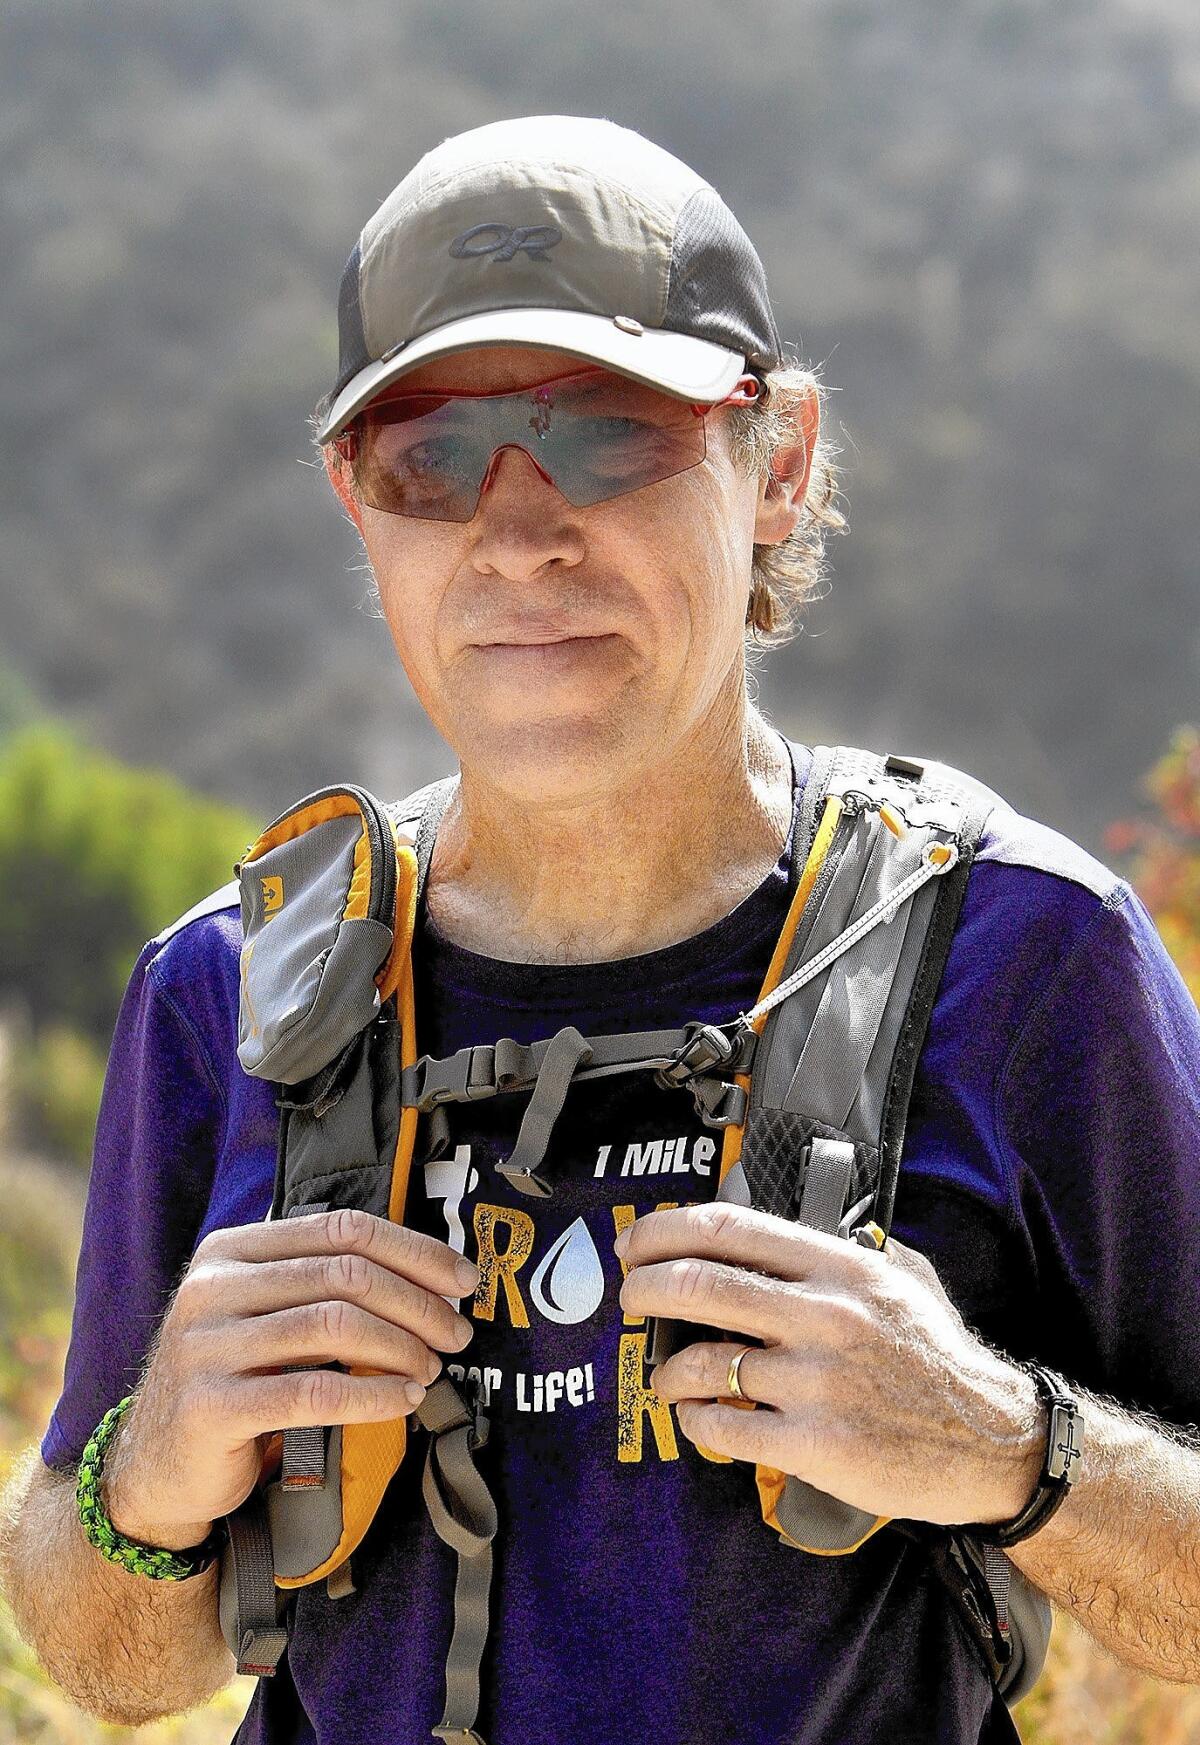 Roy Wiegand, photographed on Tuesday, June 10, 2014, will run from Angels Stadium in Anaheim for his 80-mile trek to raise money for the Michael Hoefflin Foundation for Children's Cancer in honor of Christopher Wilke, the 12-year-old Burbank Boy Scout and Angels fan who lost his battle with the disease in March.